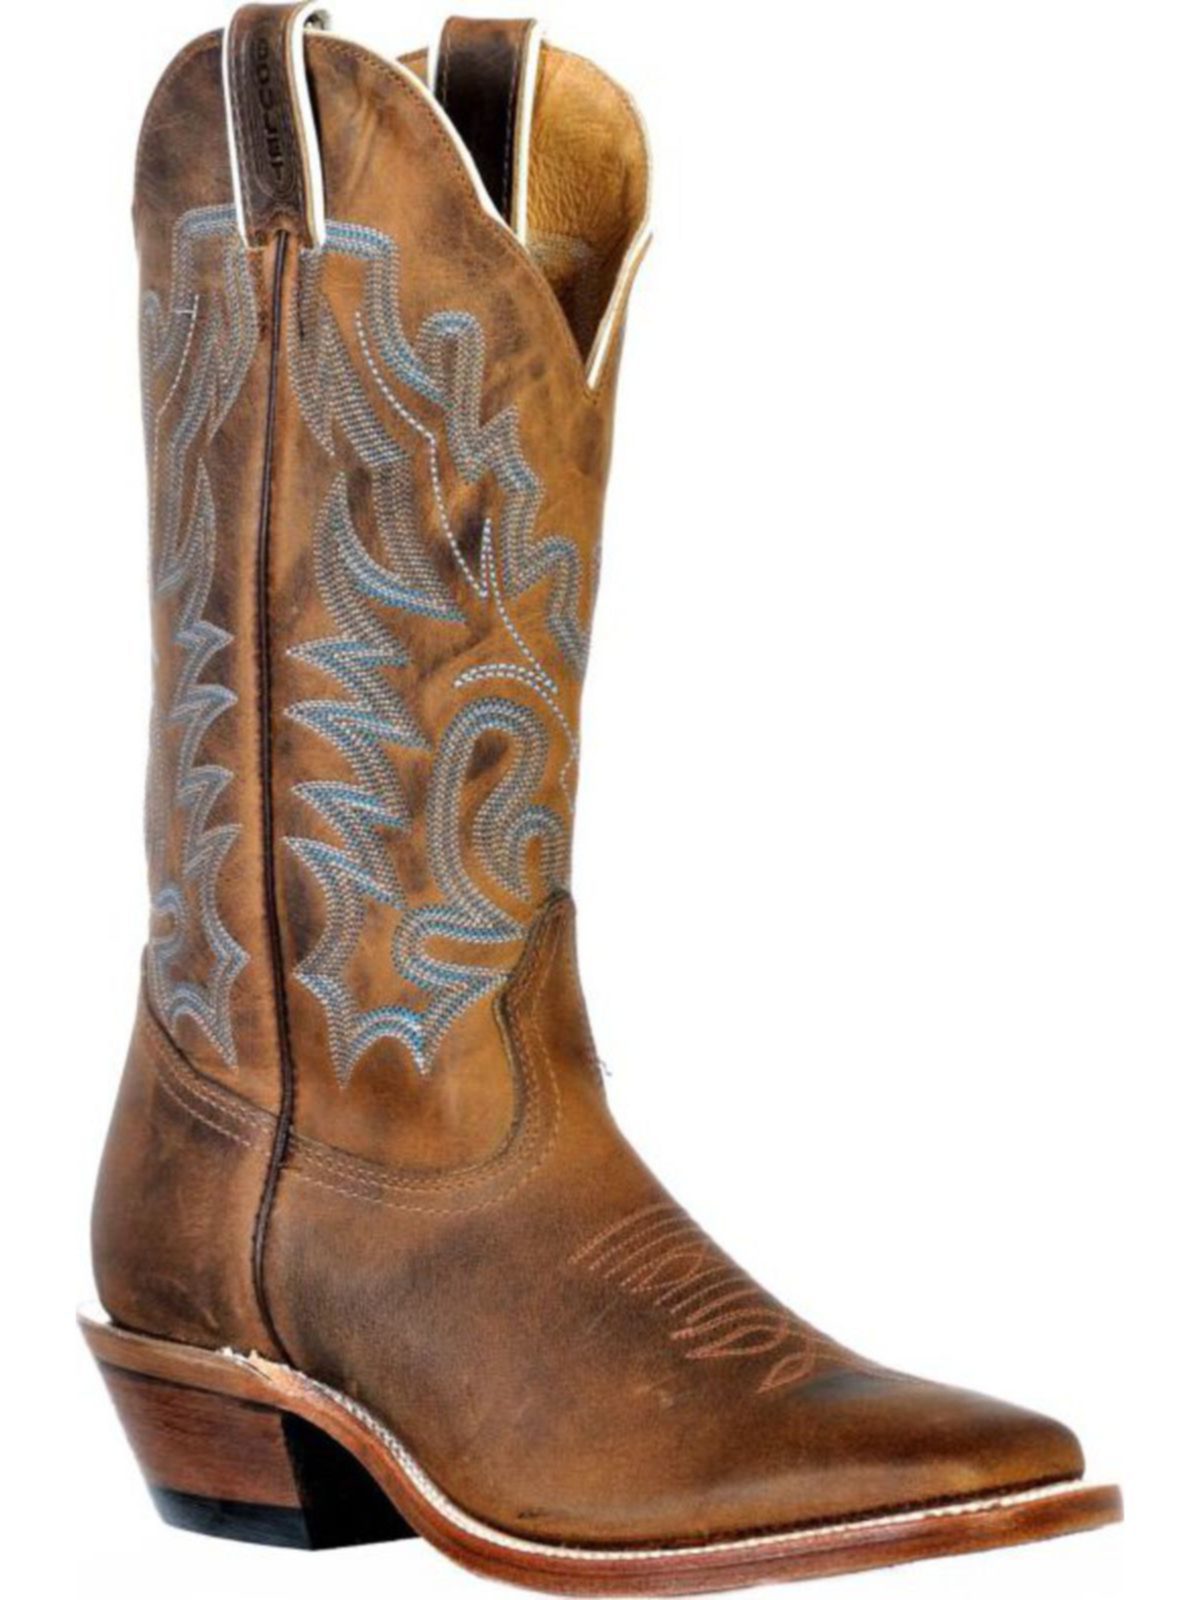 Shop Boulet Womens Hillbilly Golden Wide Square Toe Cowgirl Boot 9354 ...